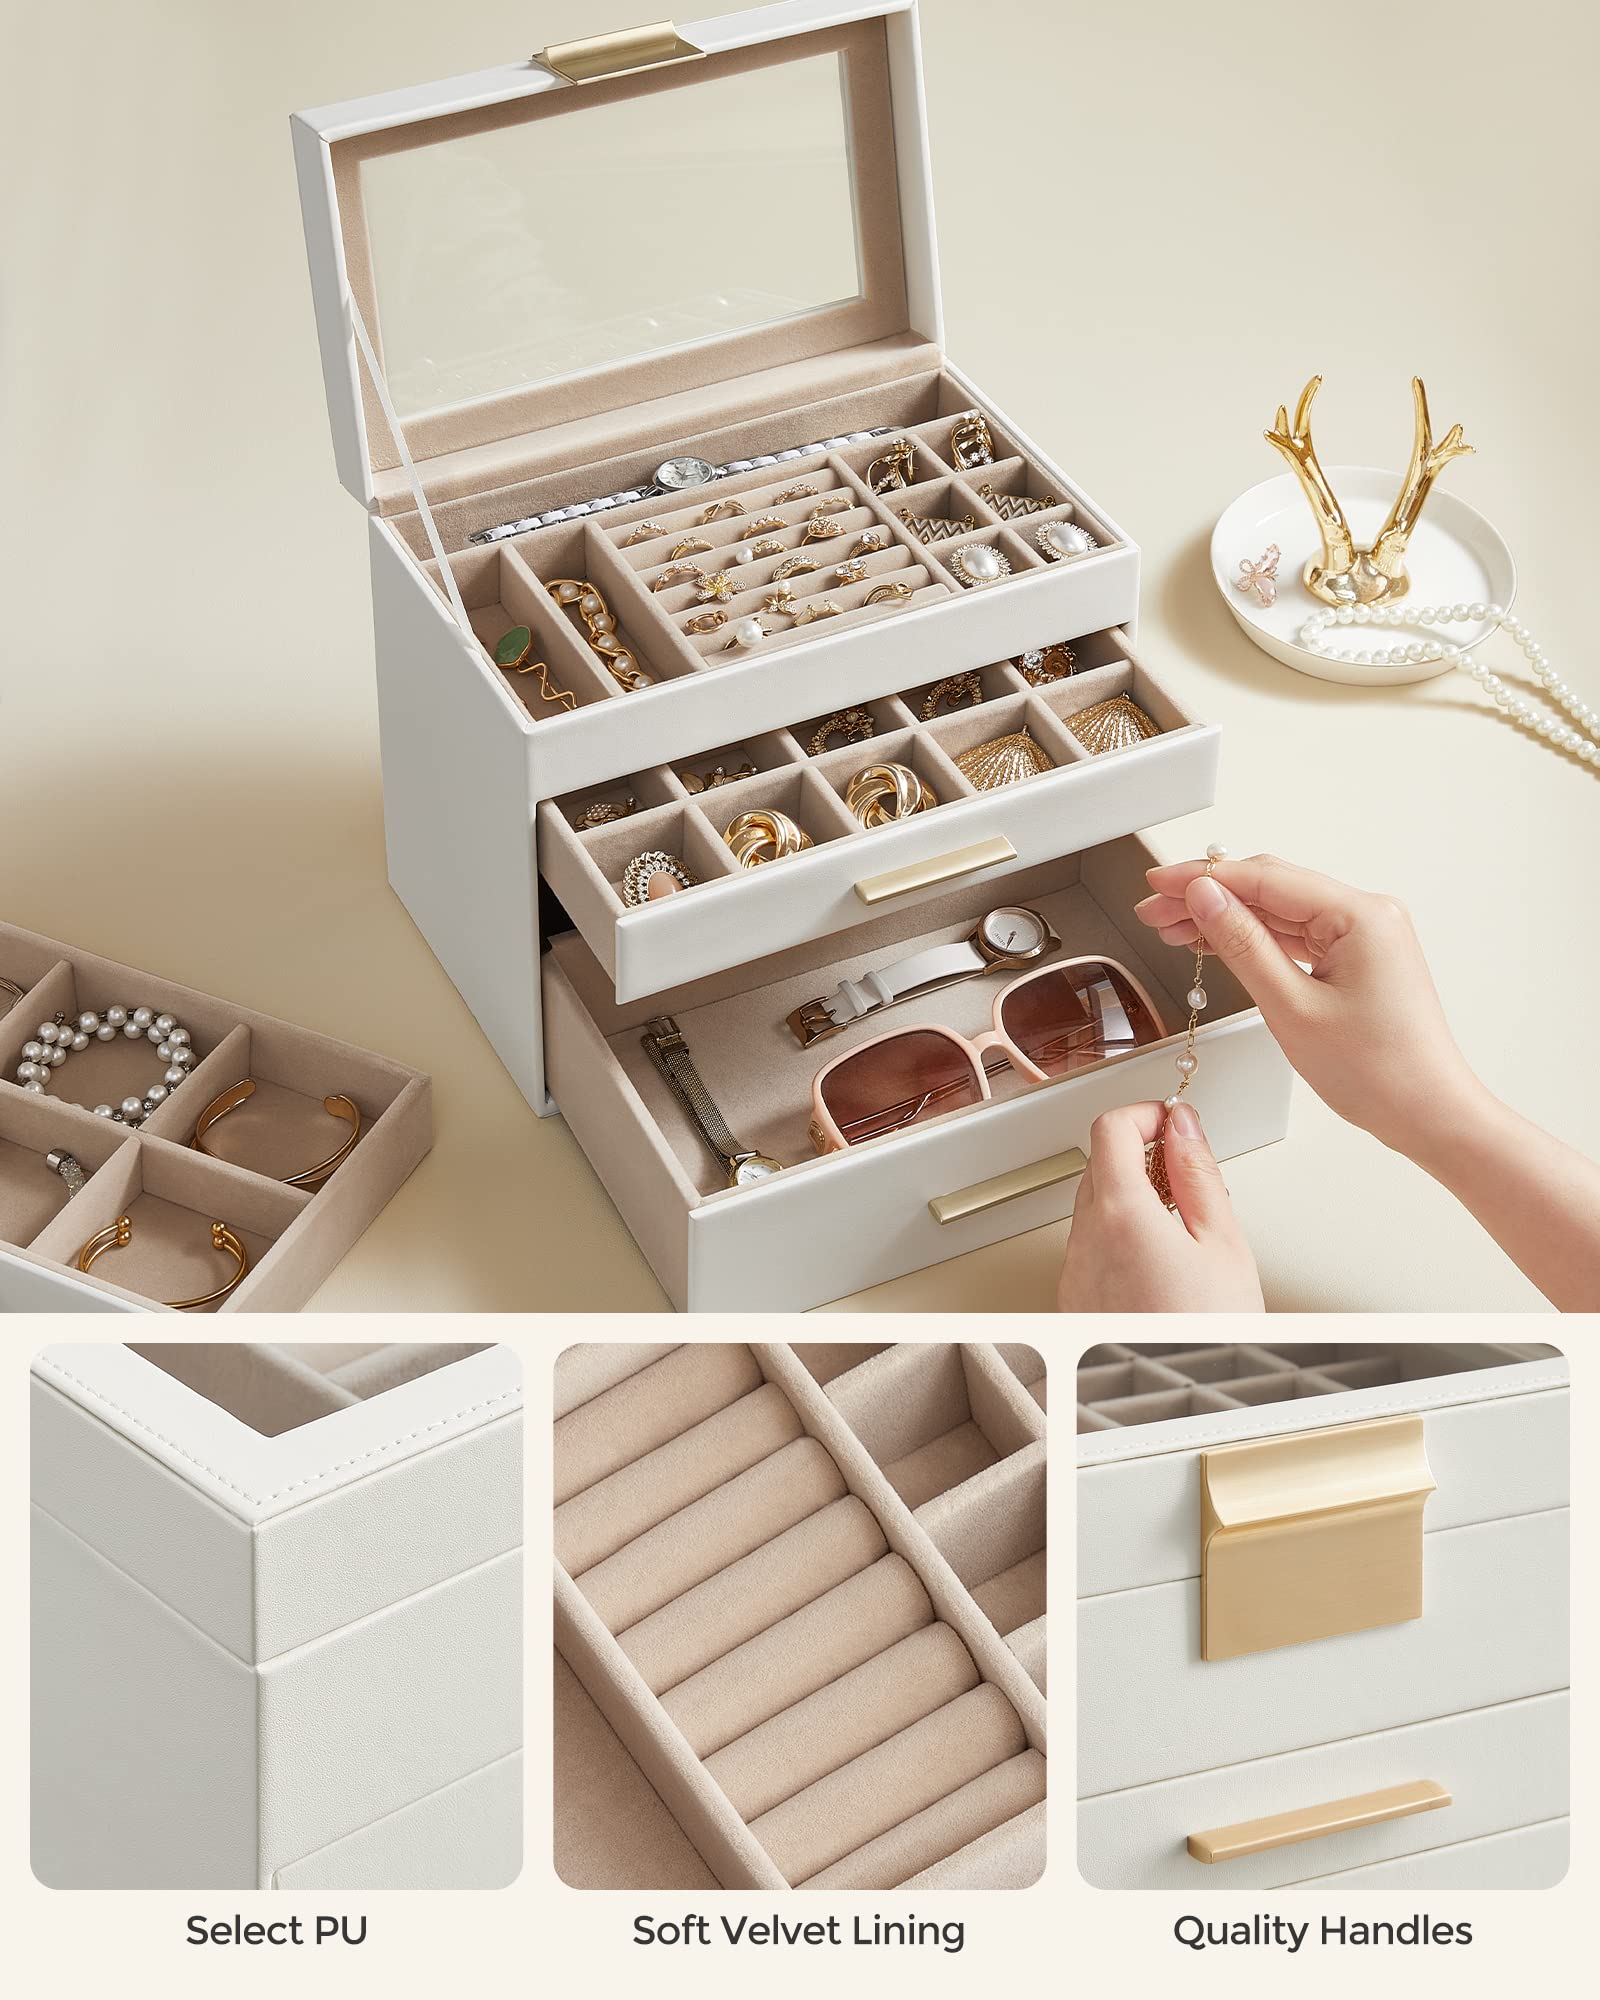 SONGMICS Jewelry Box with Glass Lid, 4-Layer Jewelry Organizer, 3 Drawers, for Sunglasses, Big Jewelry, Jewelry Storage, Modern Style, Cloud White and Gold Color UJBC161W01